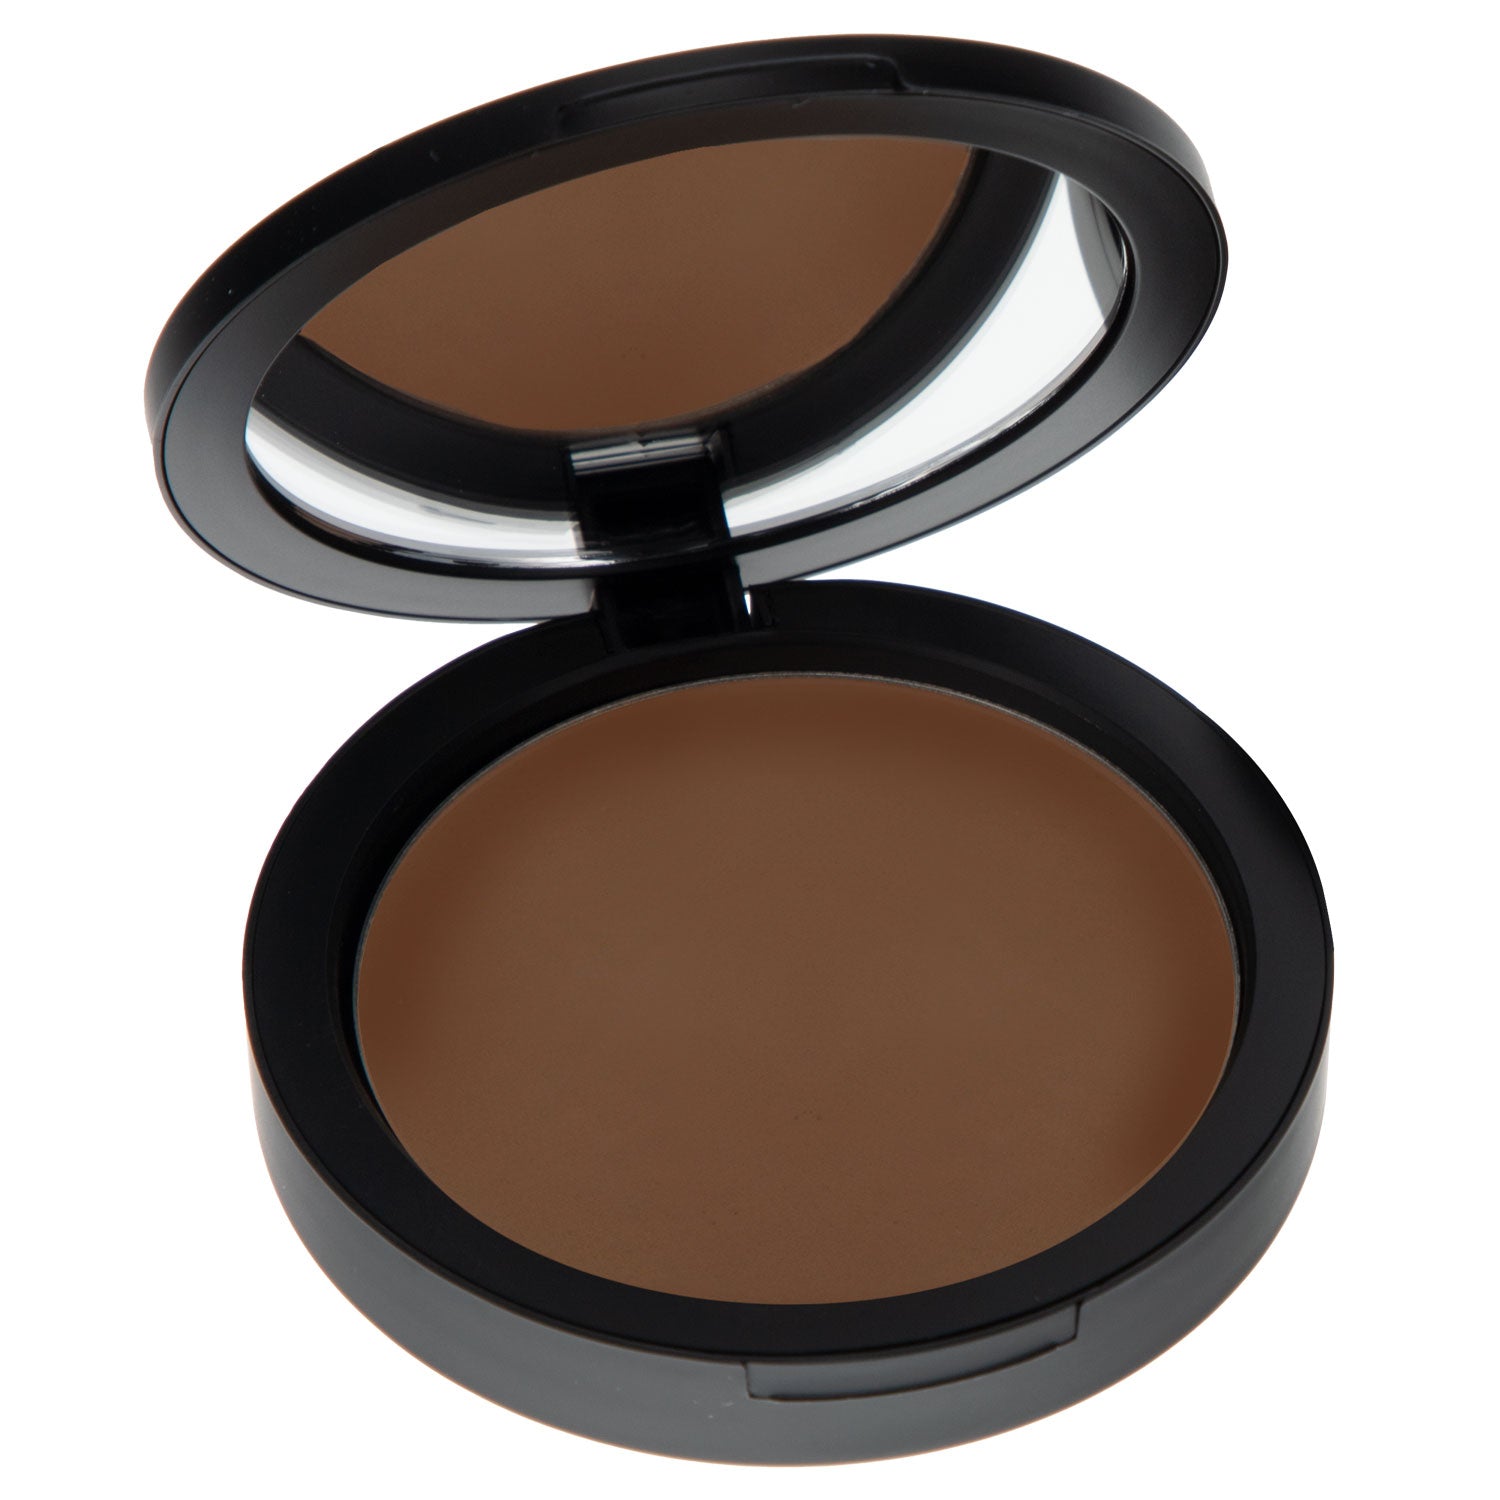 Mineral Based 4-in-1 Product is your PRESSED Powder, Foundation, SPF 15 and Soft Focus Finish All in One! No loose powder mess! Formulated without talc, gluten, phthalates, fragrance, GMO, parabens, or corn.